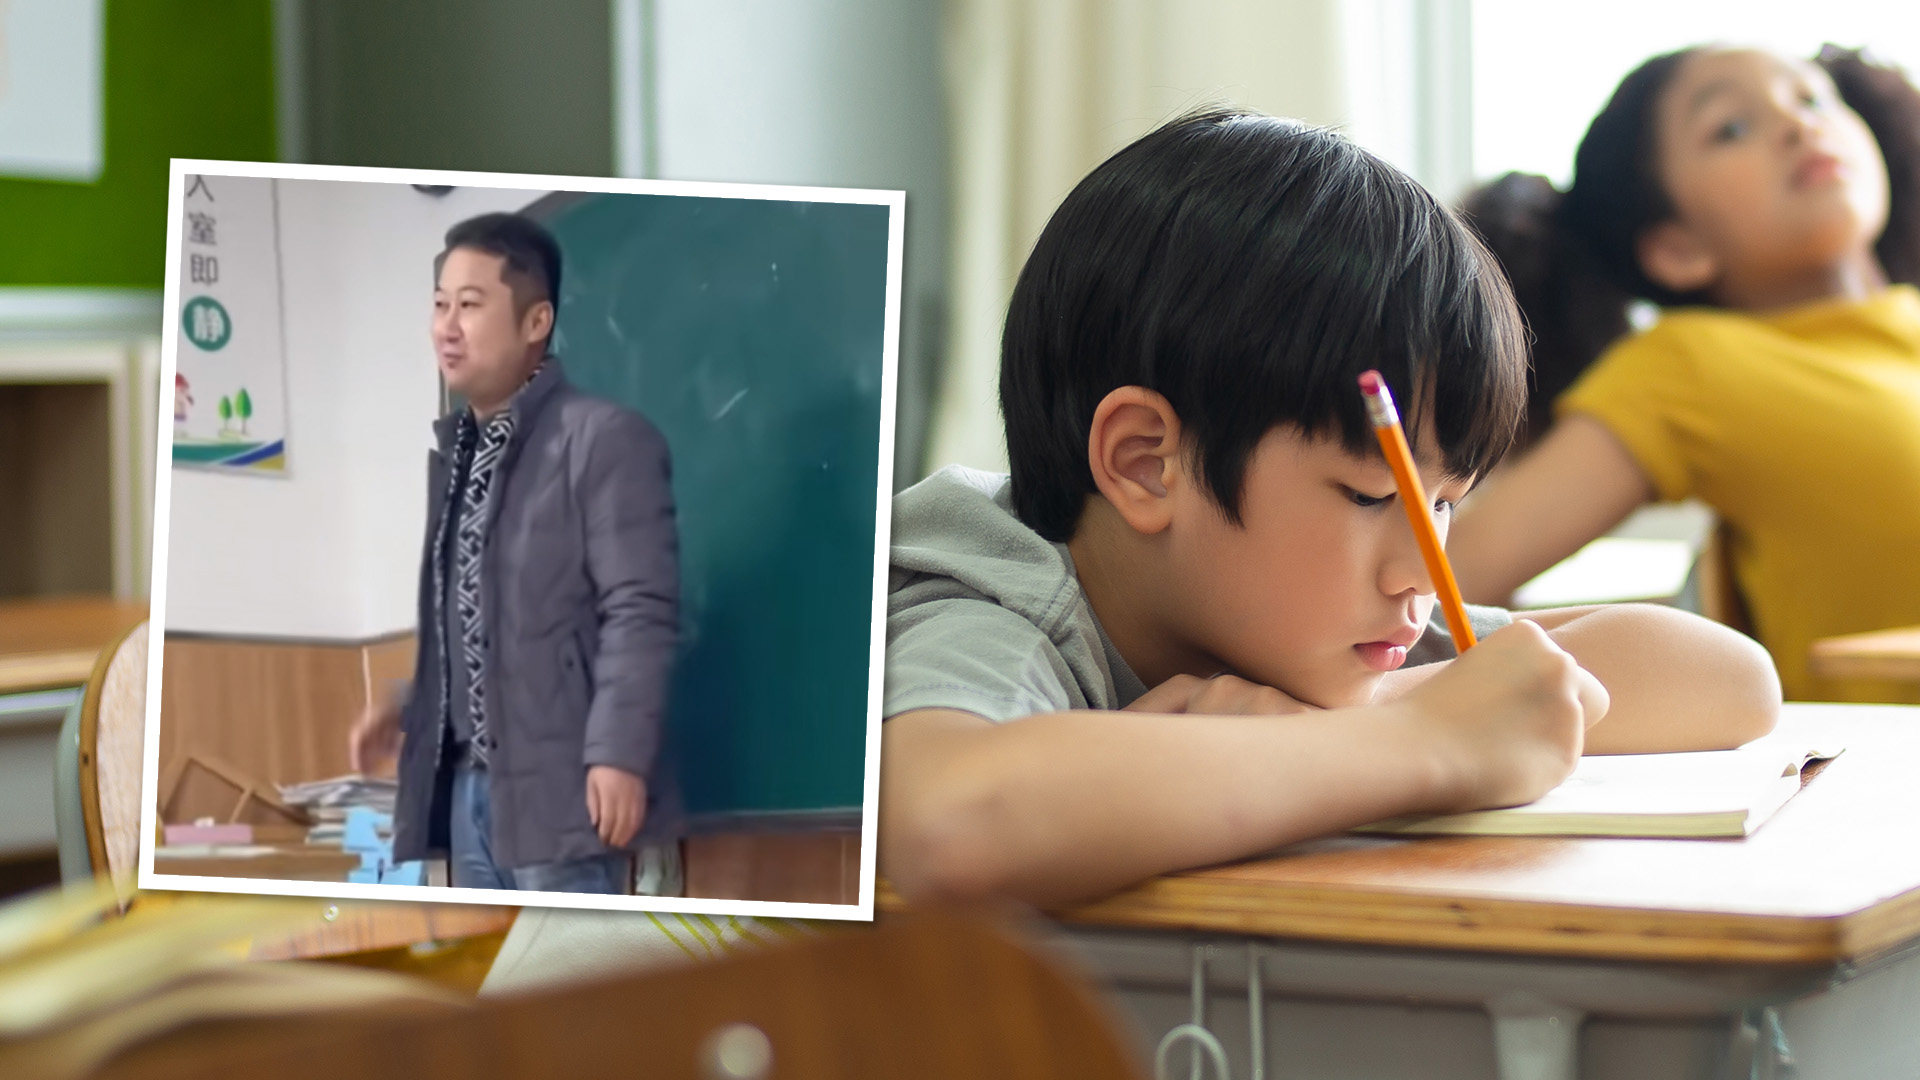 A father in China has extolled the virtues and mental strength of his son in a speech to teachers and parents at the boy’s school. The proud dad said his child would go on to become “an extraordinary person” despite his poor performance in exams. Photo: SCMP composite/Shutterstock/Douyin

